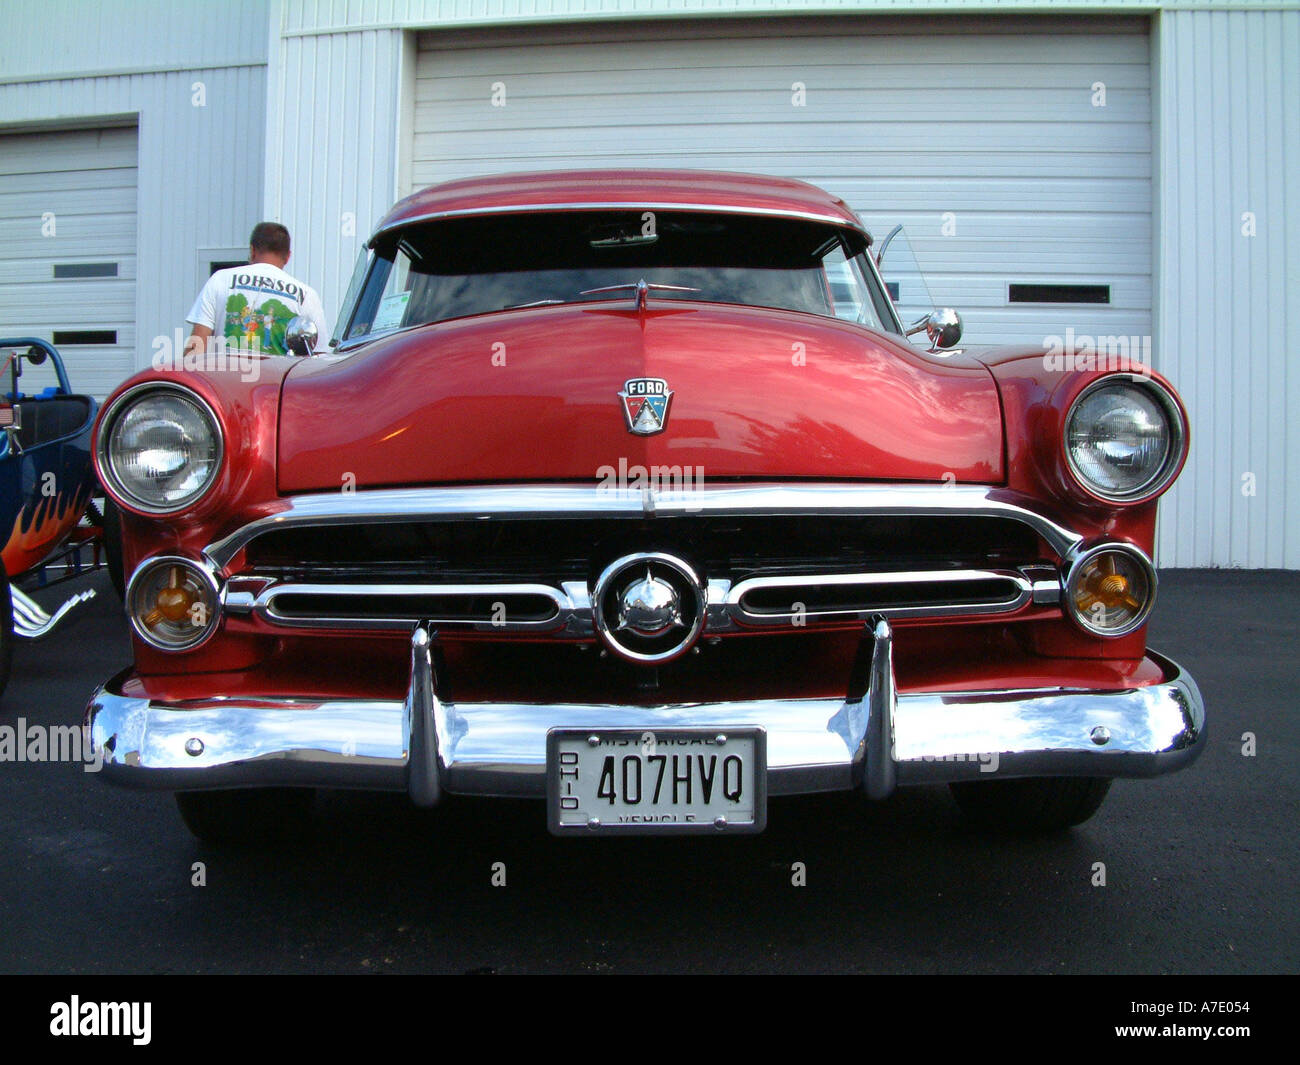 1952 ford Courier Sedan Delivery 407HVQ Stockfoto